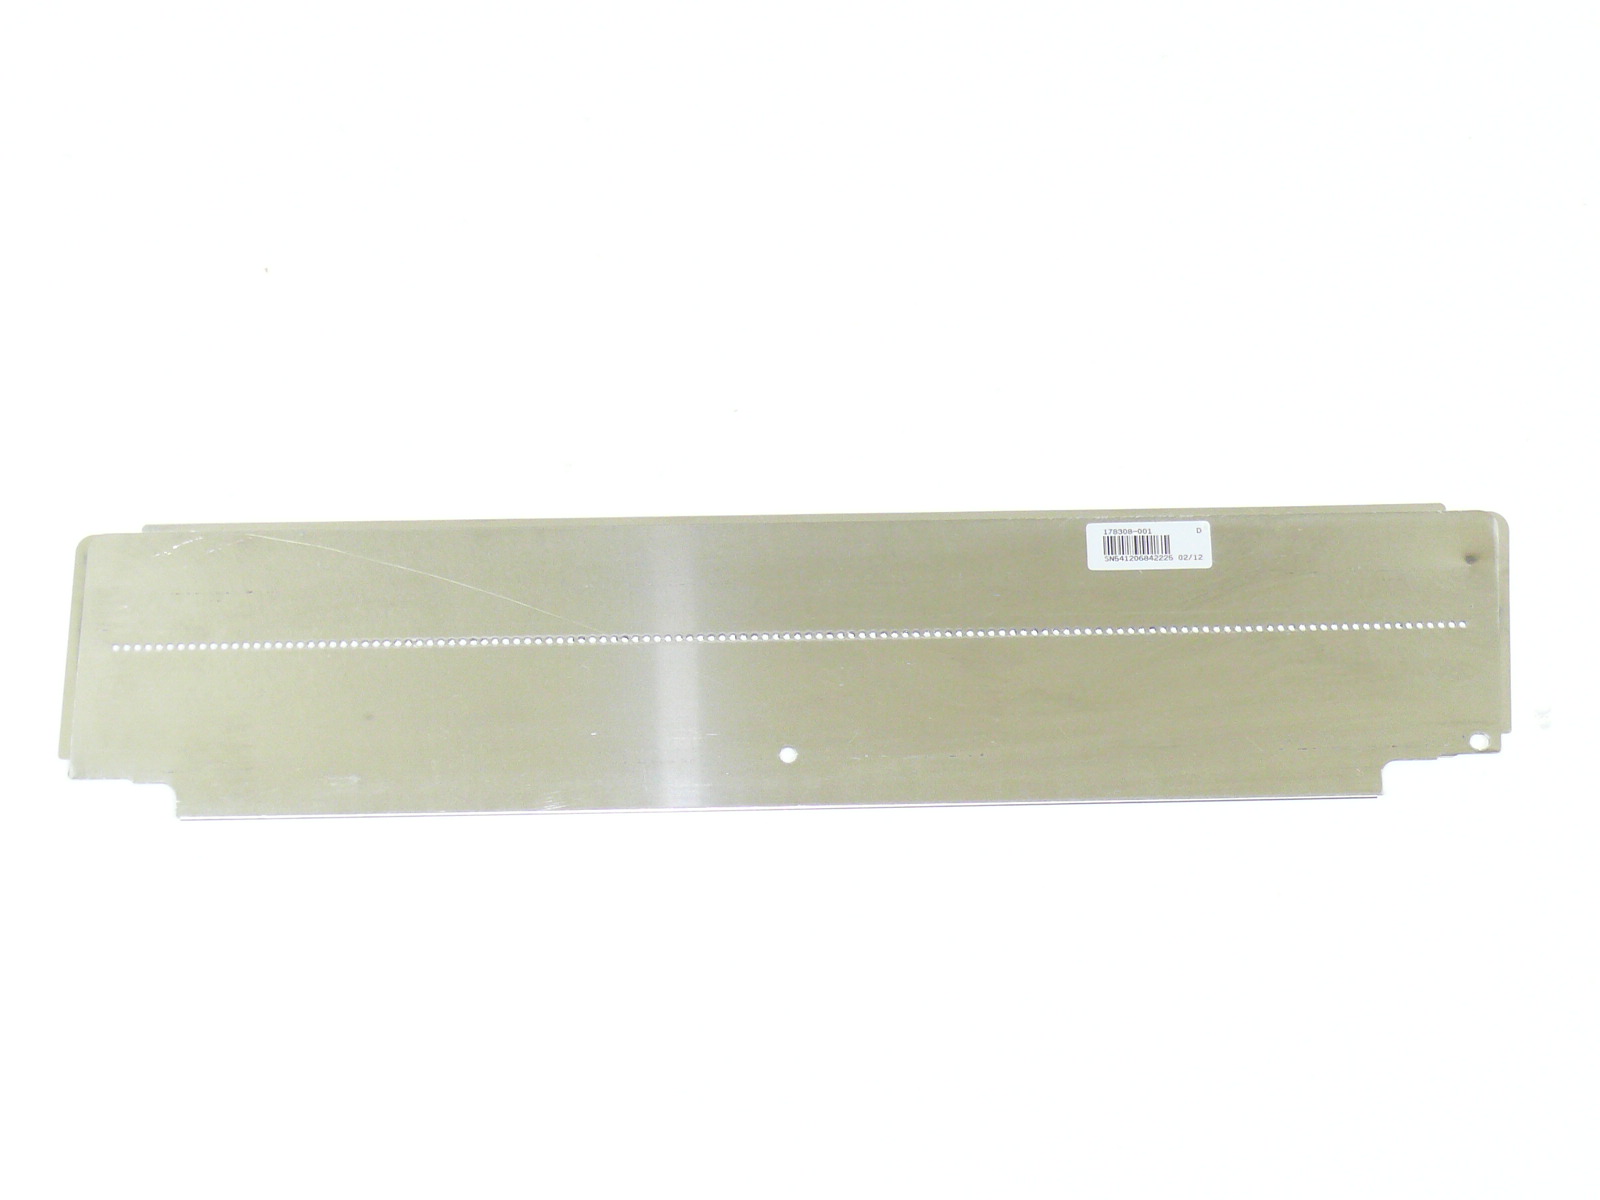 178308-901 -  - Replacement Ribbon Mask/HB Cover Assy, P7220